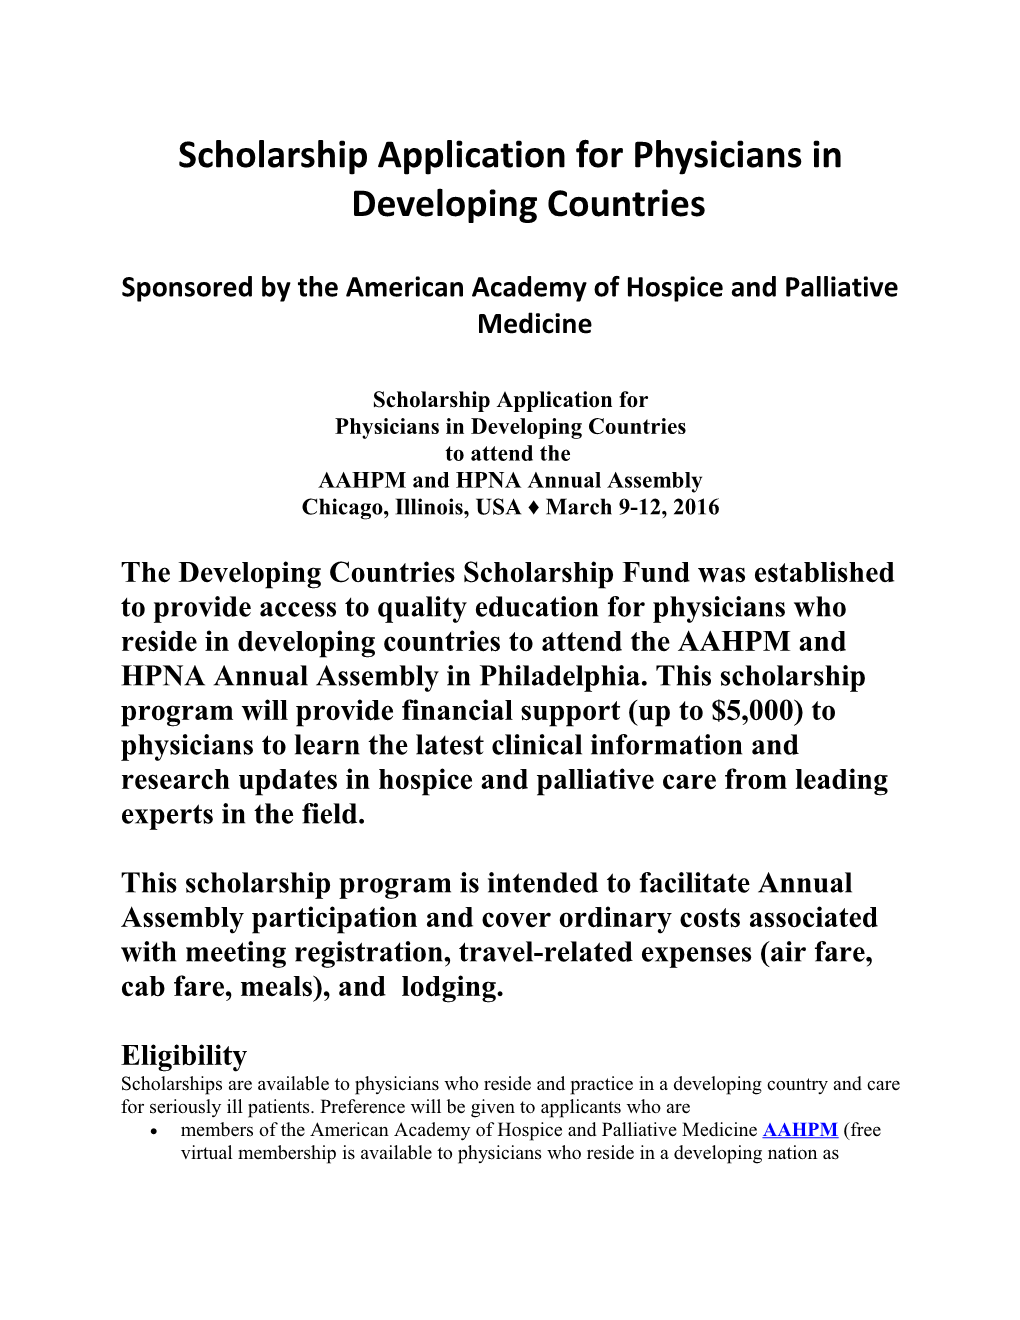 Scholarship Application for Physicians in Developing Countries